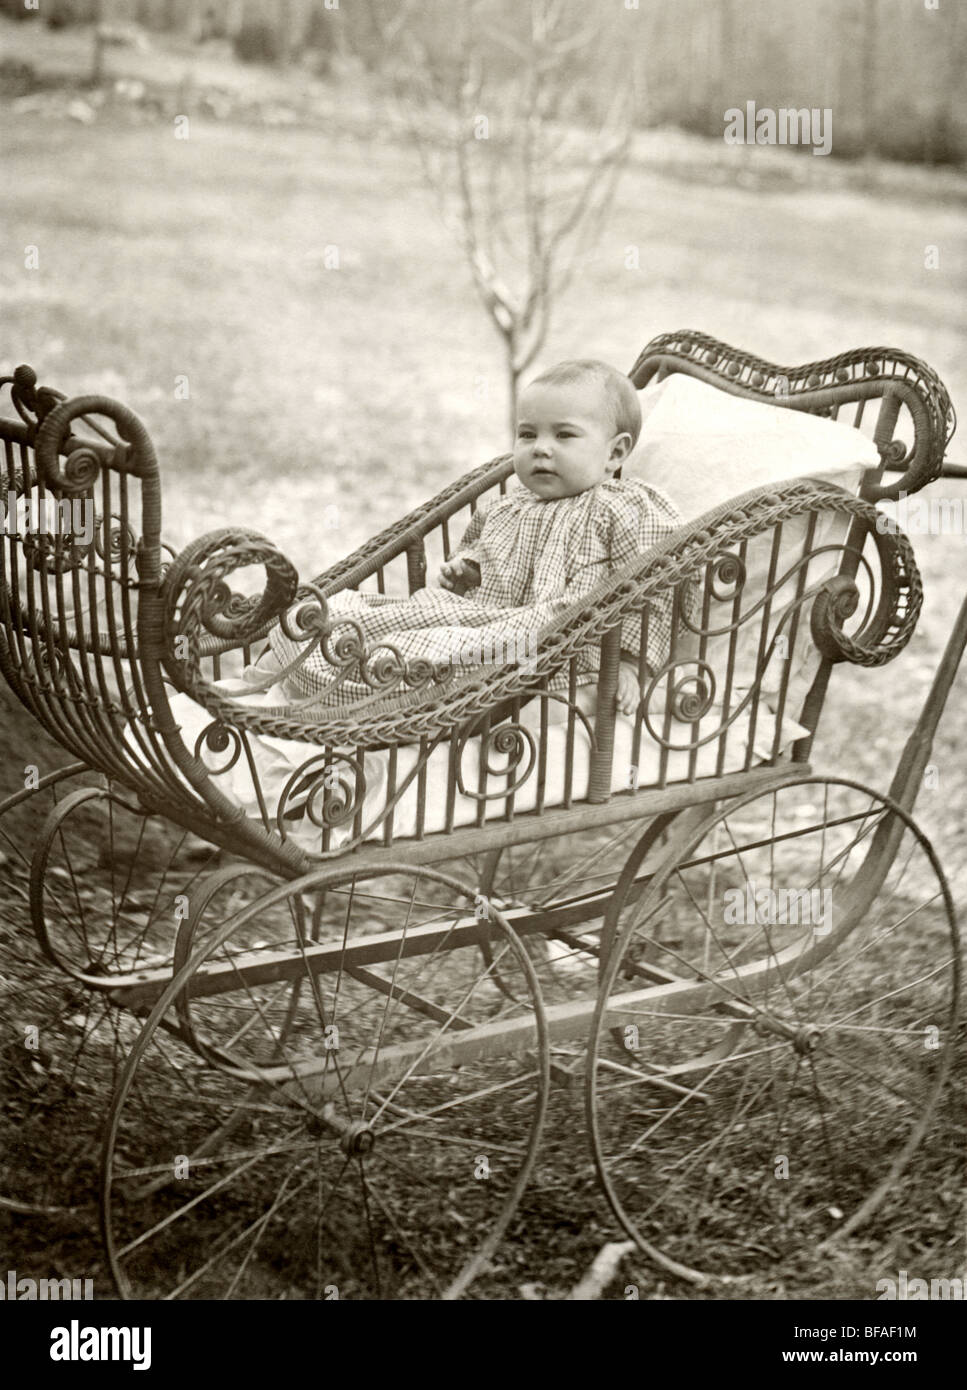 Infant in Exceptional Wicker Baby Carriage Stock Photo